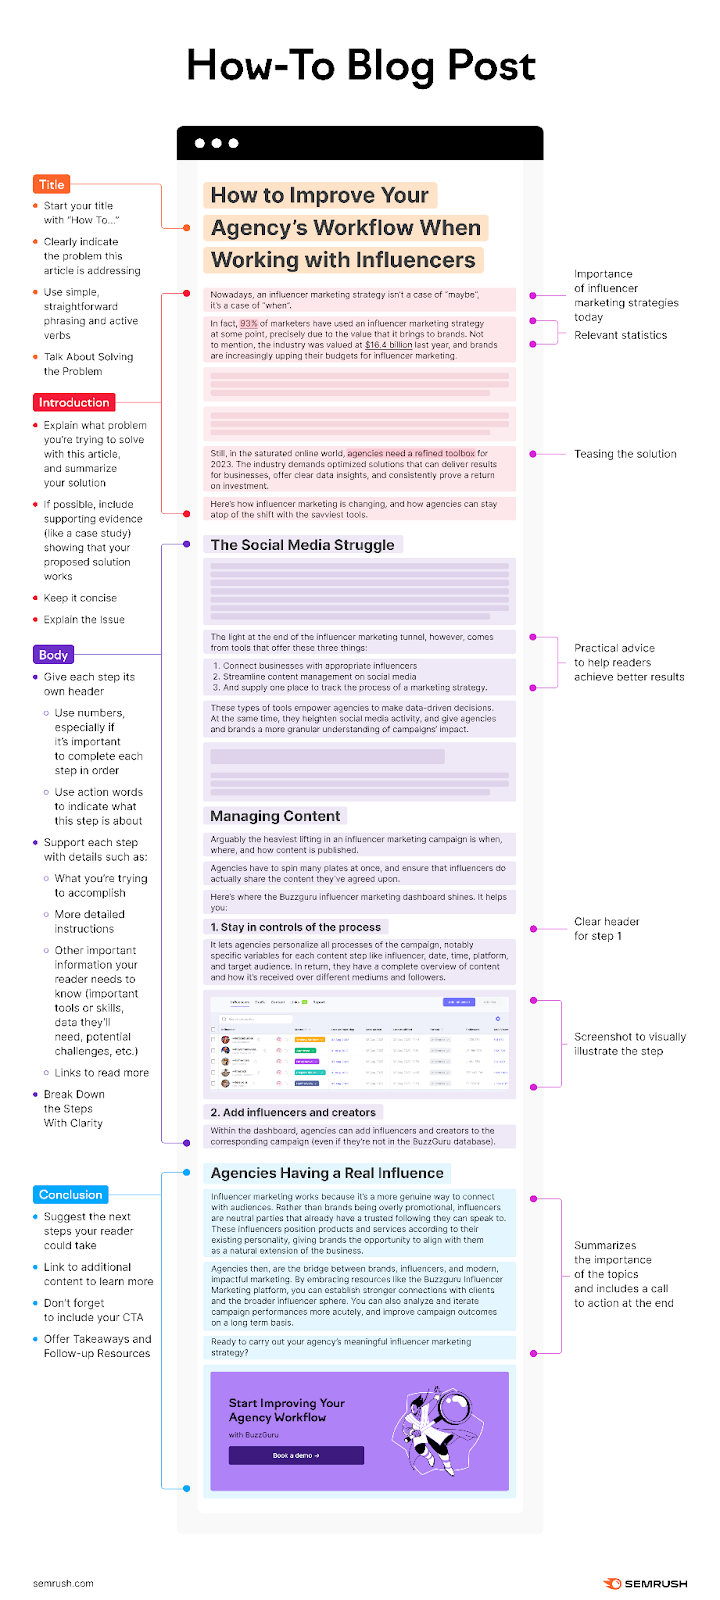 An infographic laying out and explaining "How-To Blog Post" sections